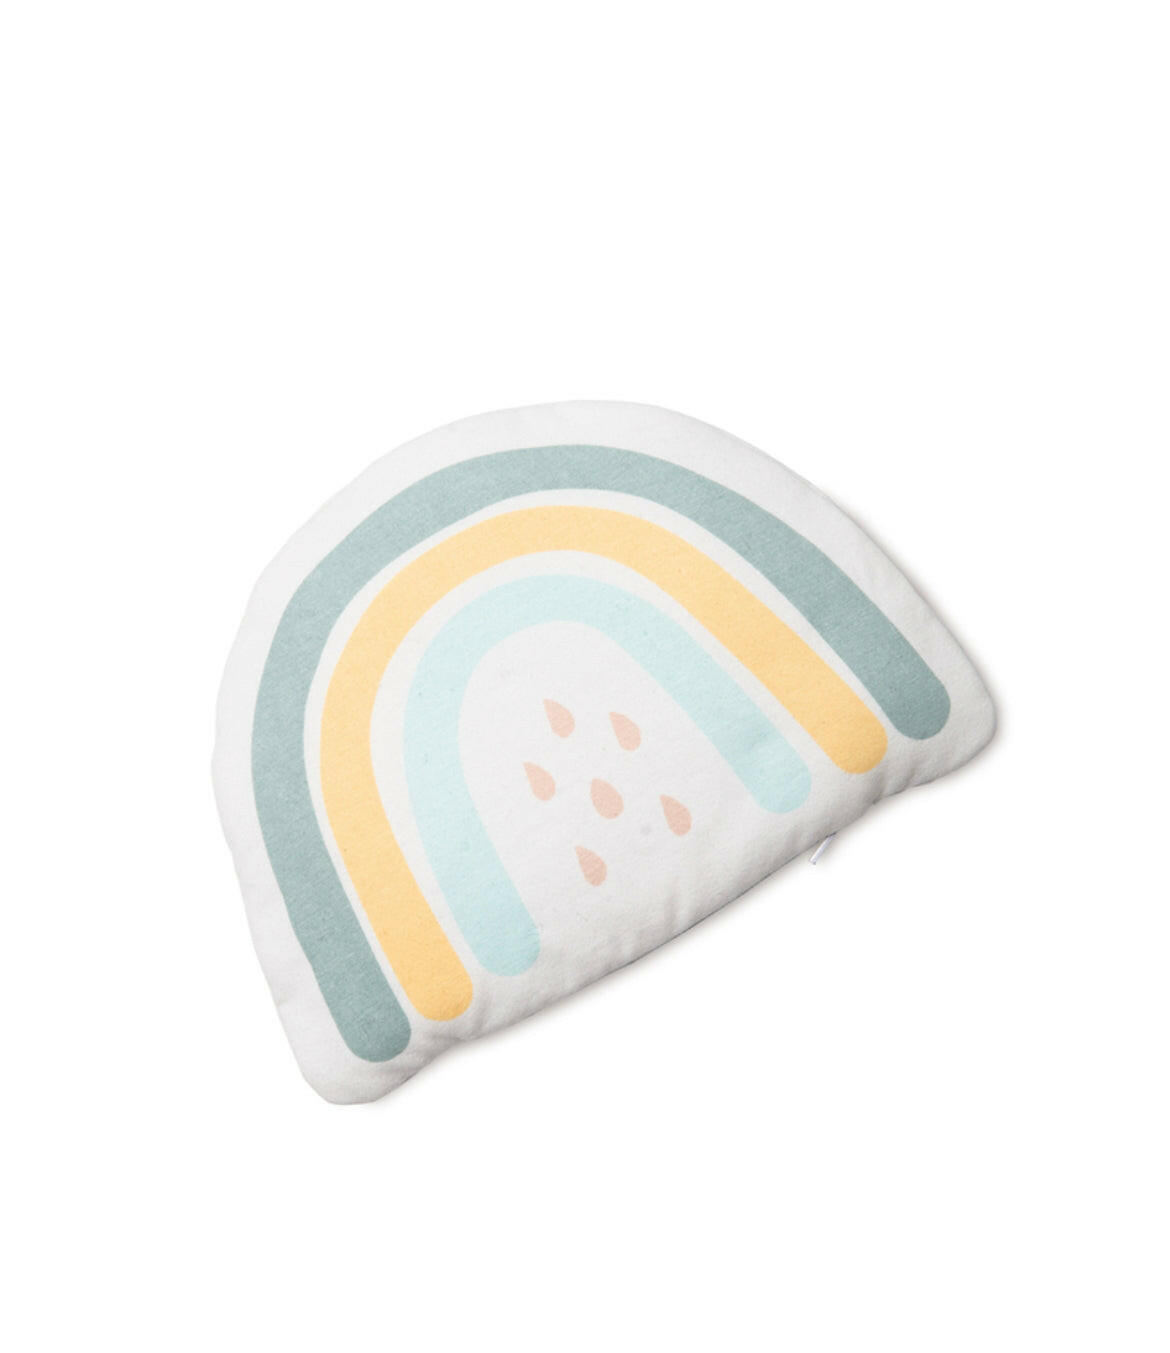 Doomoo Baby Belly Pillow to Relieve Cramps.